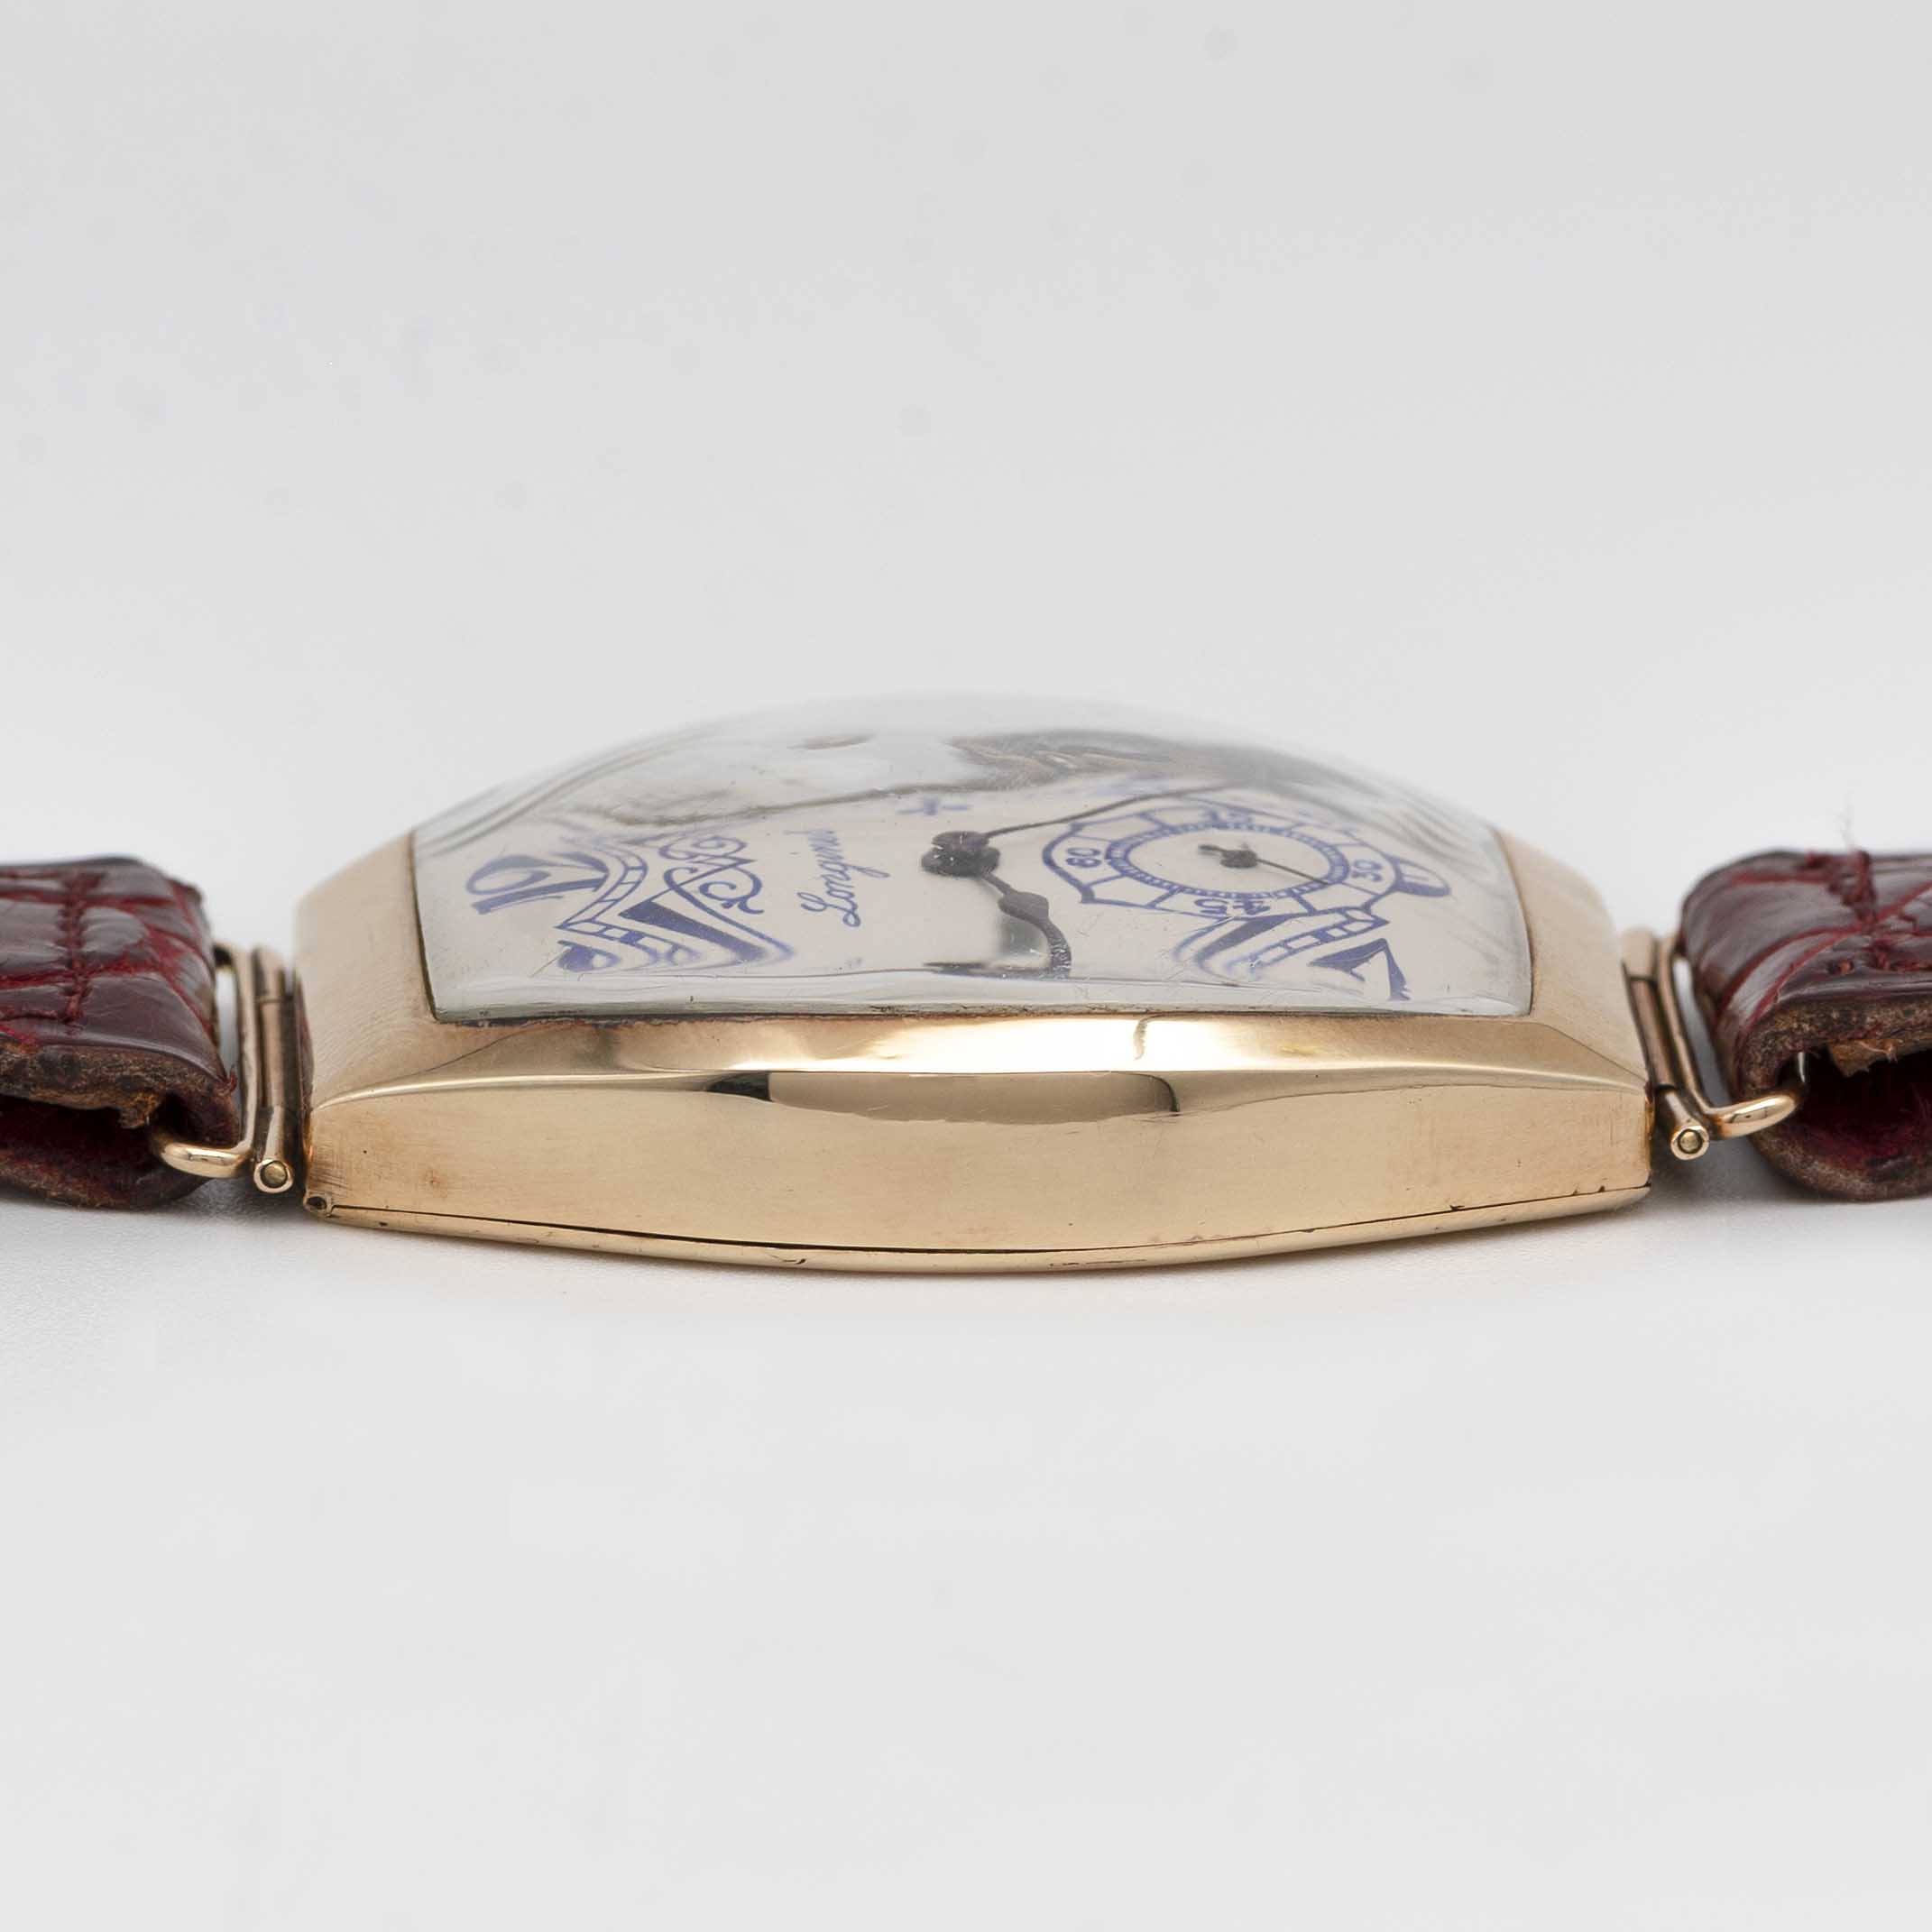 A VERY RARE GENTLEMAN'S 14K SOLID ROSE GOLD LARGE TONNEAU CASED LONGINES WRIST WATCH DATED 1915, - Image 9 of 9